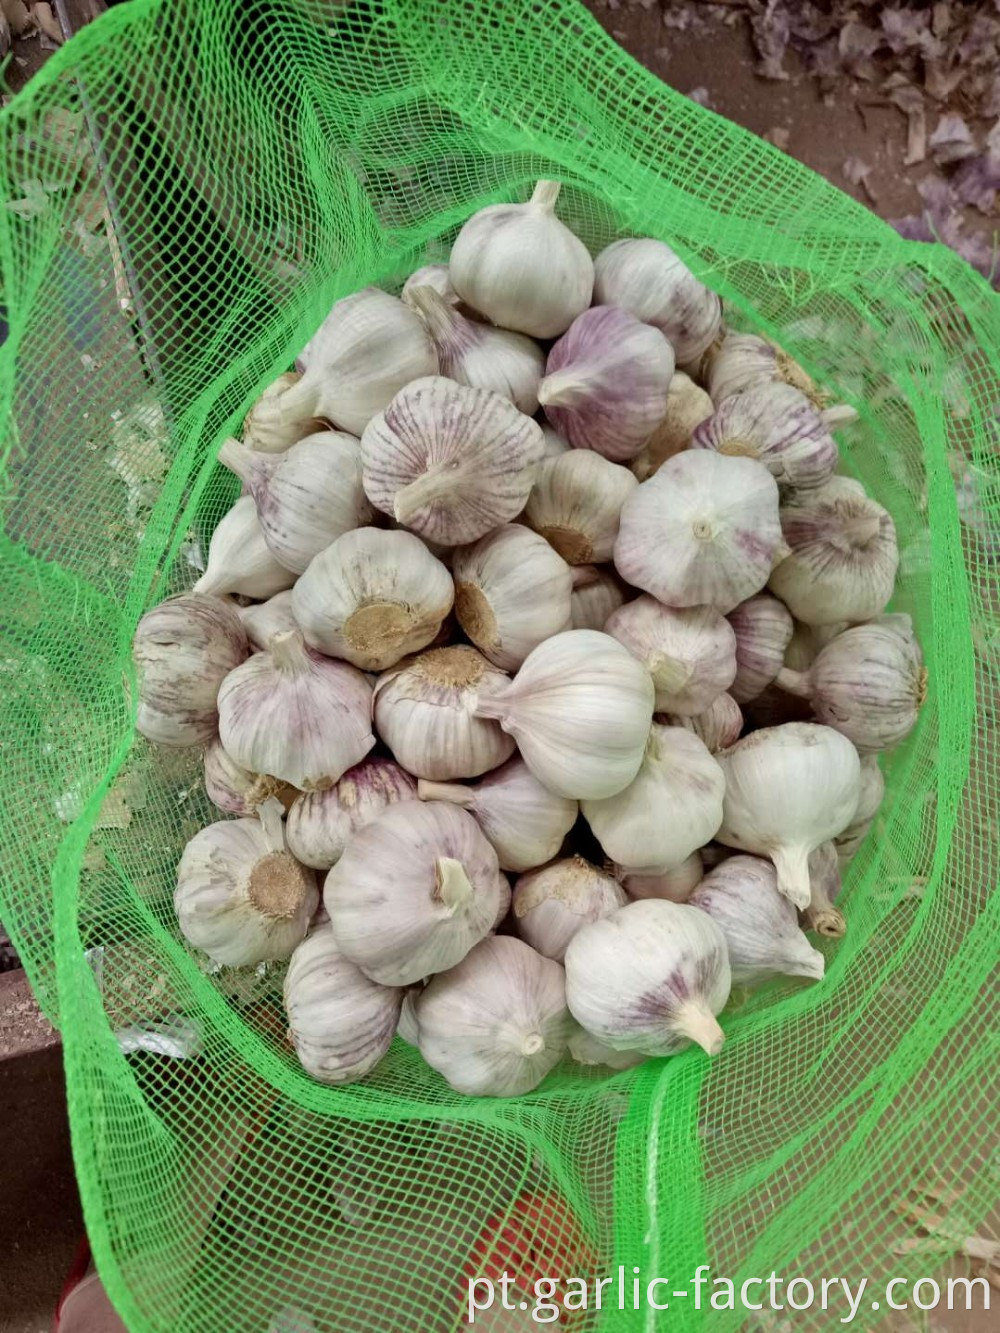 The cheapest and The smallest of garlic